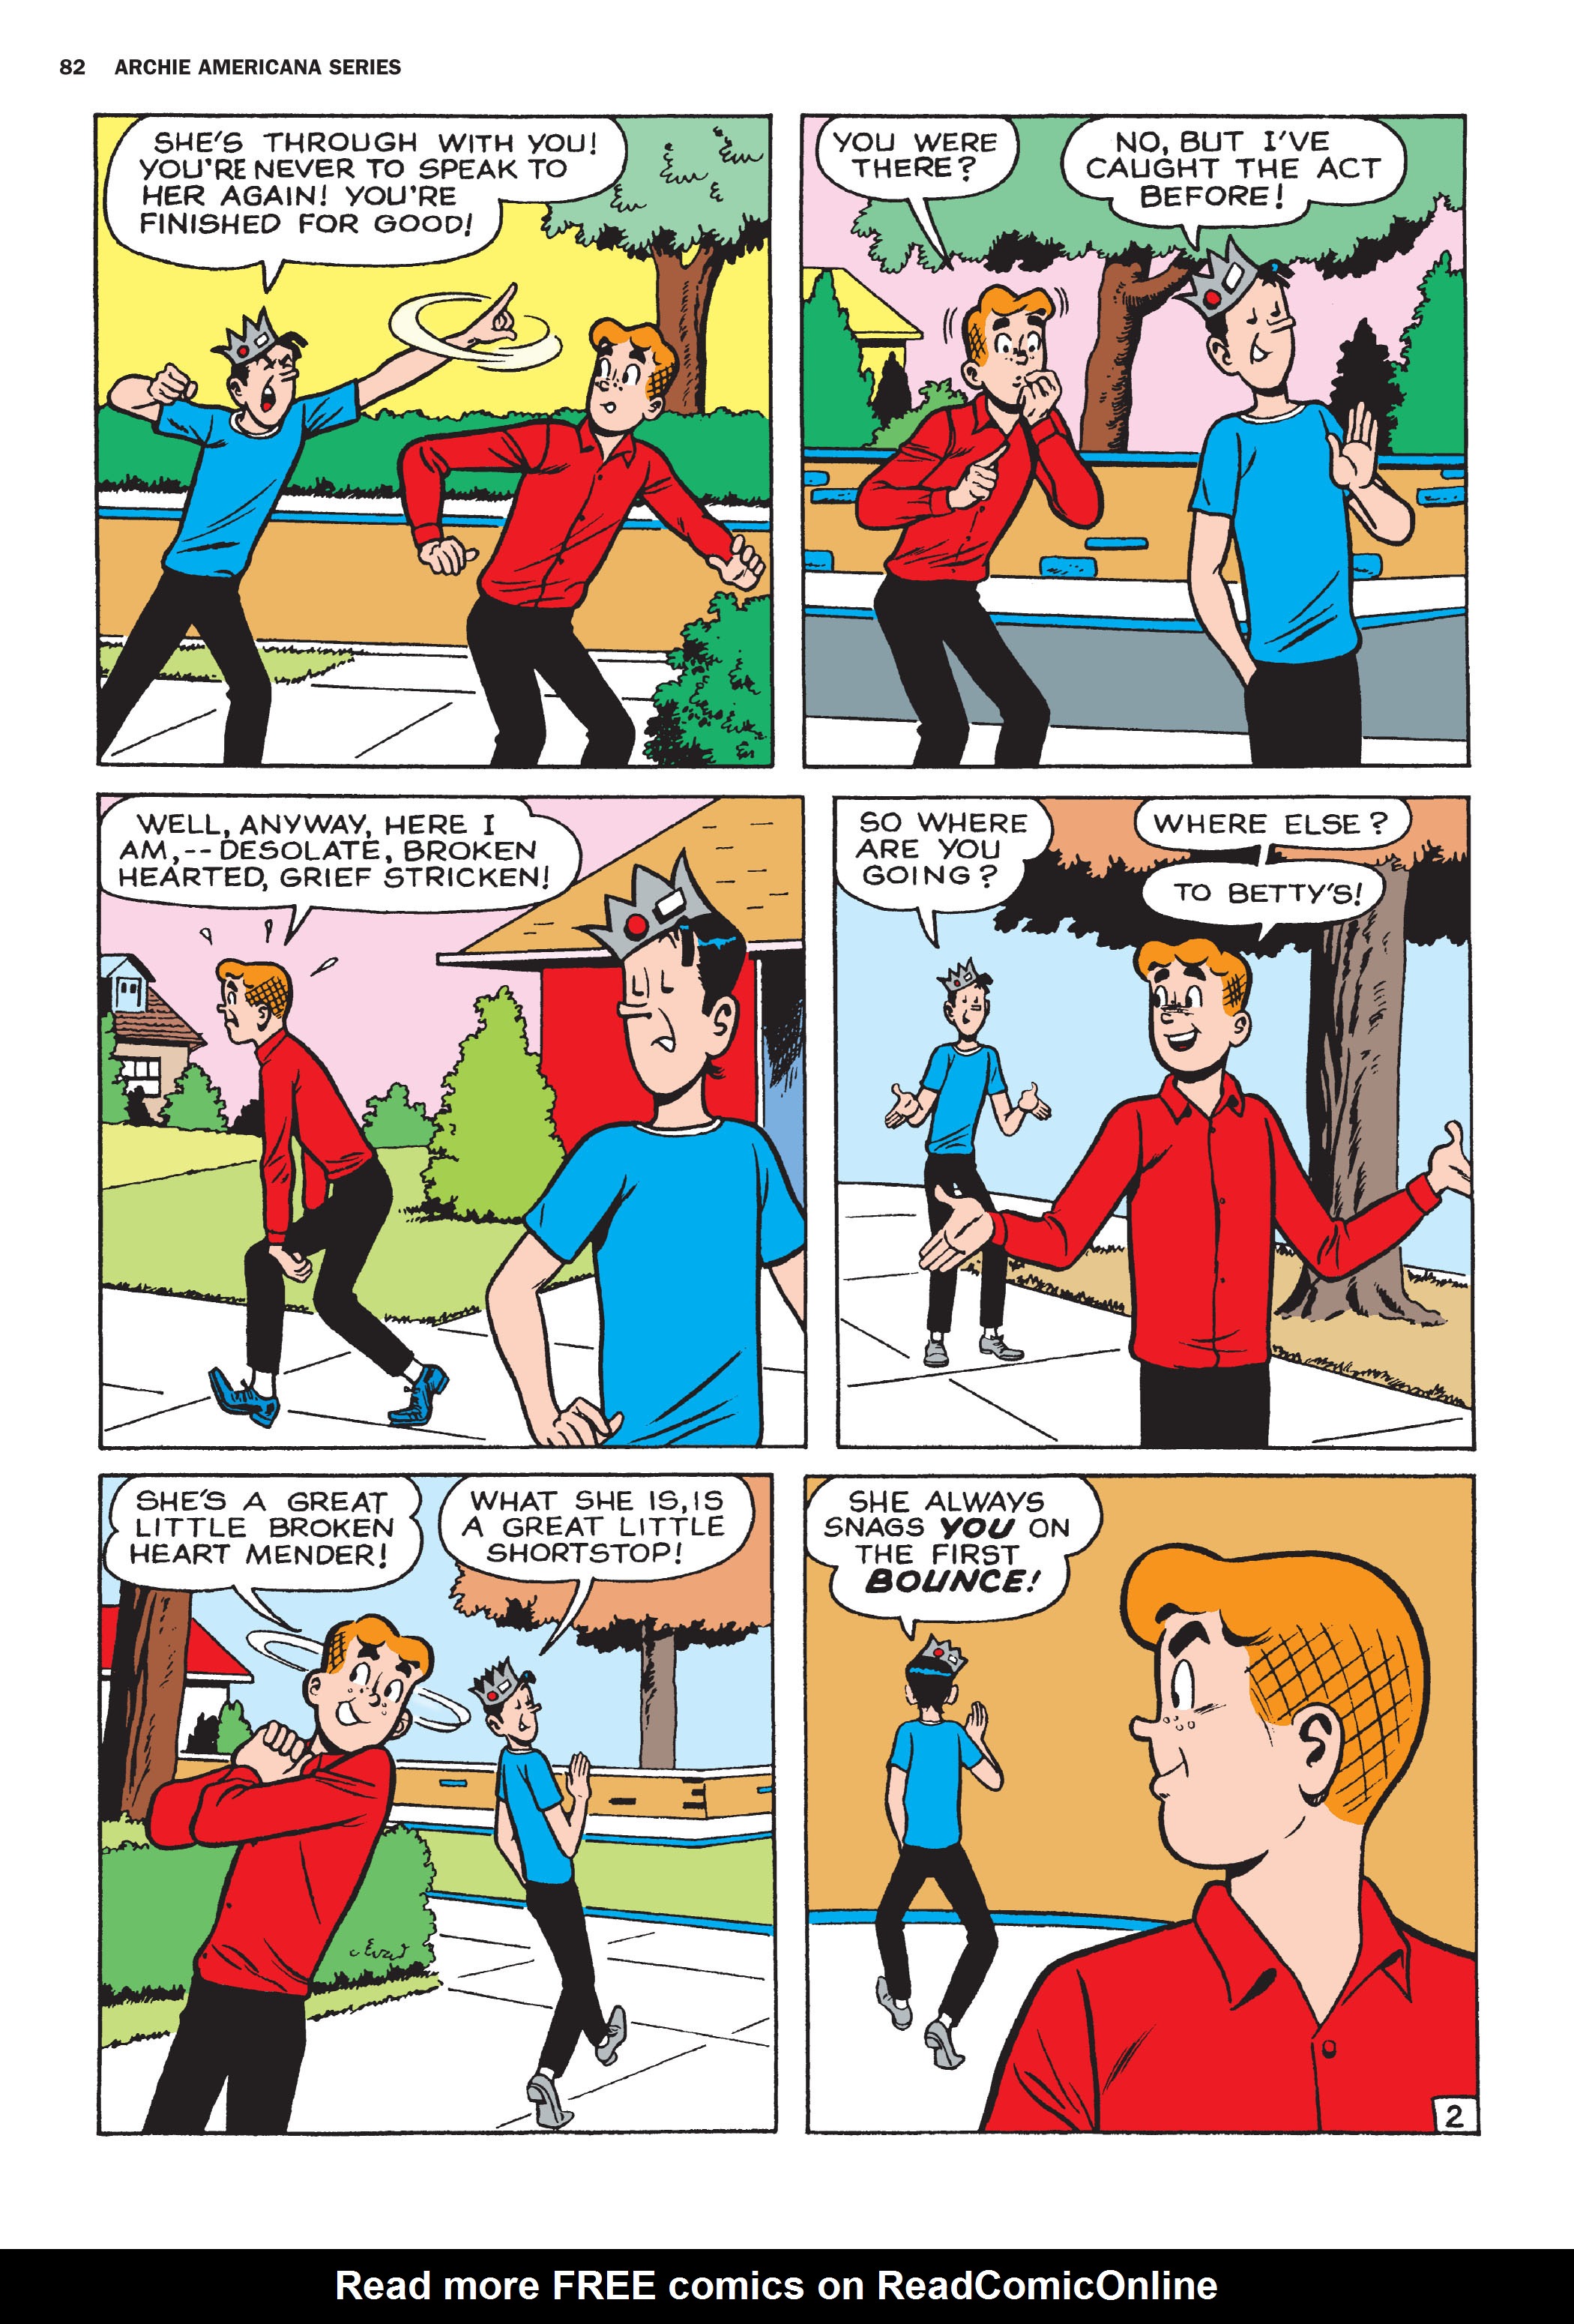 Read online Archie Americana Series comic -  Issue # TPB 8 - 83